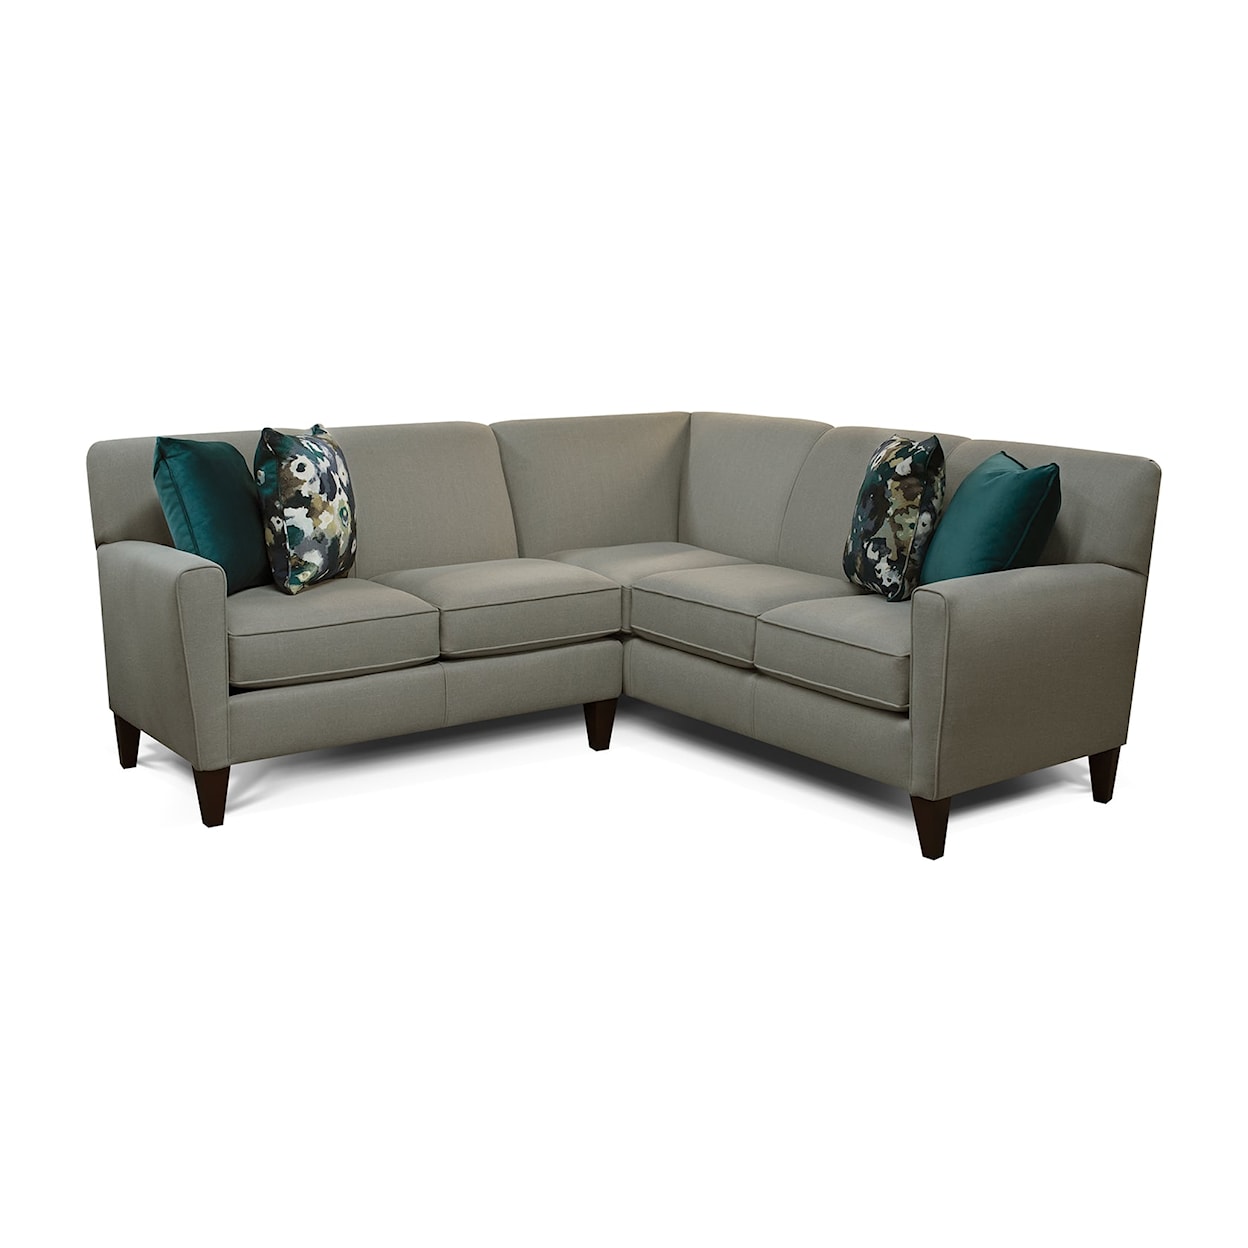 England Collegedale 2-Piece Sectional